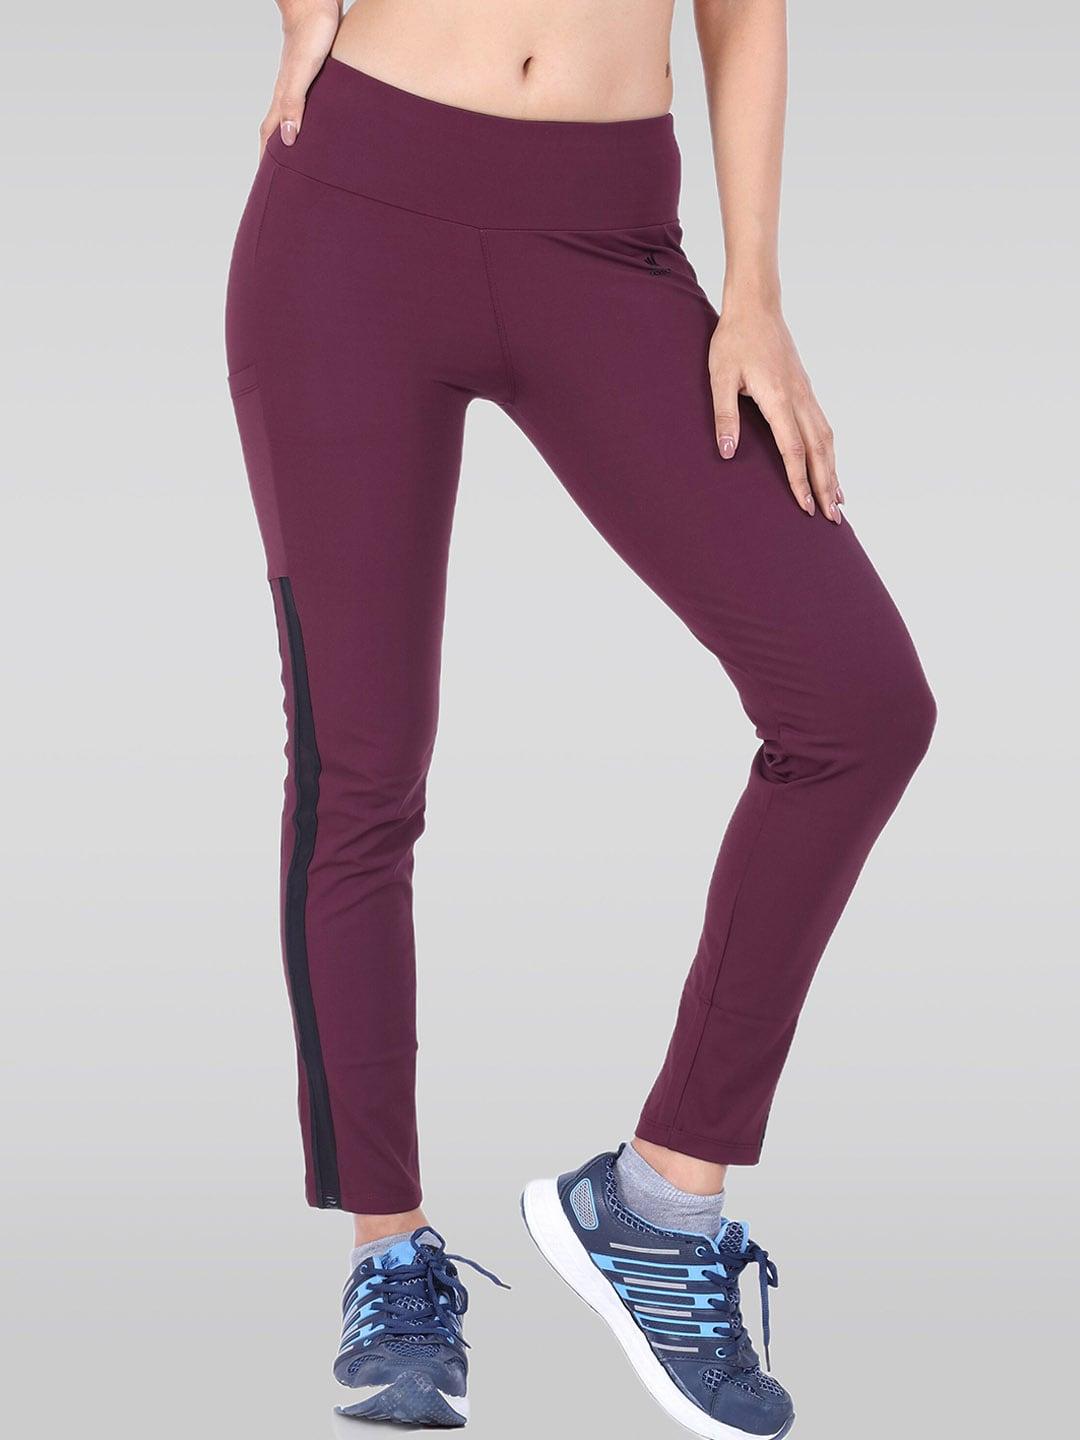 laasa-sports-women-slim-fit-dry-fit-ankle-length-sports-tights